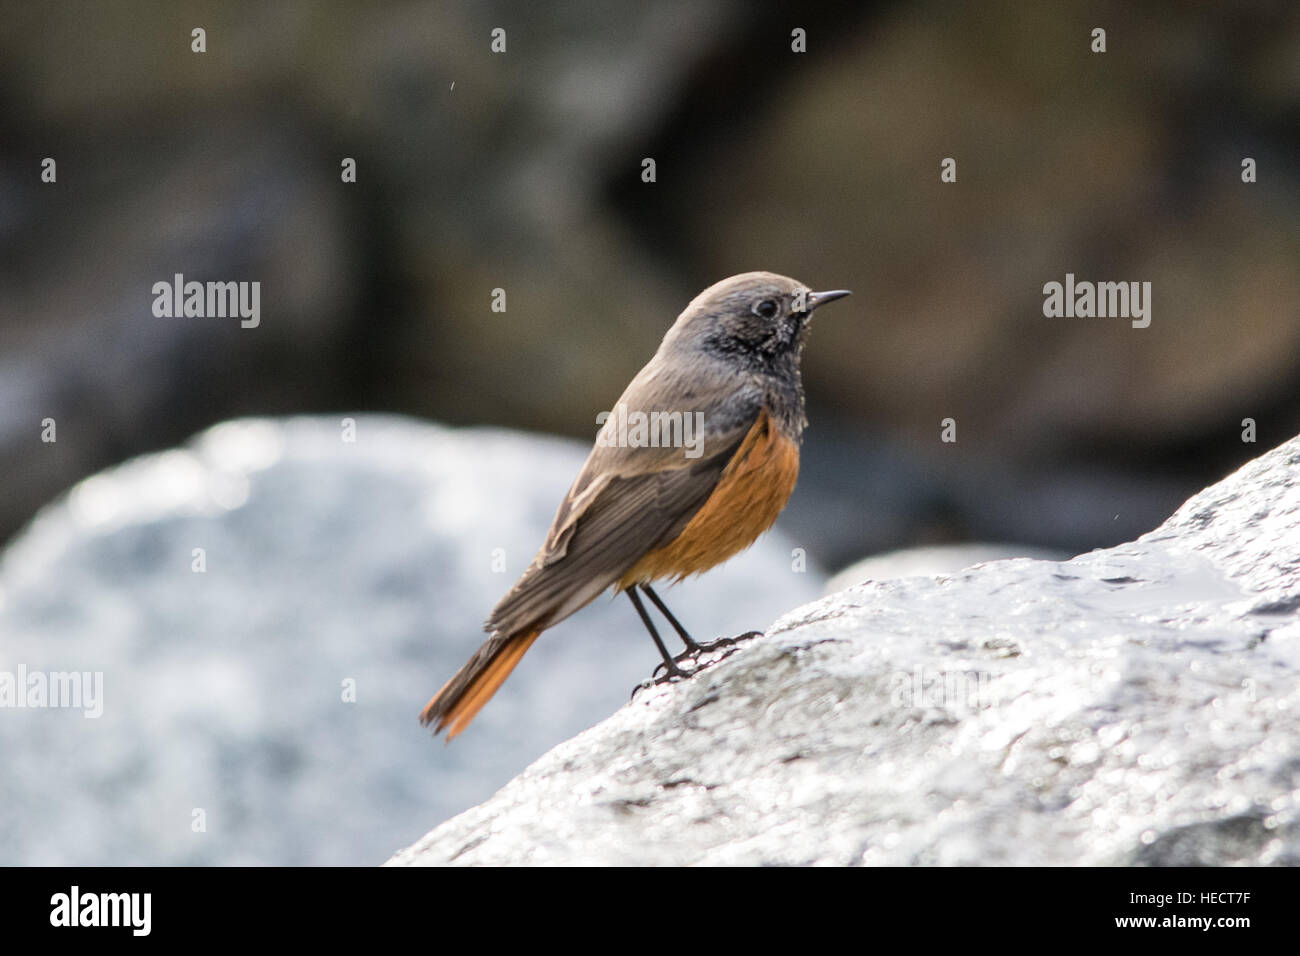 Mousehole, Cornwall, UK. 20th December 2016. A very rare Eastern Black Redstart bird(Phoenicurus ochruros phoenicuroides) has shown up on the seafront at Mousehole. Bird watchers are starting to gather in increasing numbers to see the bird. Credit: cwallpix/Alamy Live News Stock Photo